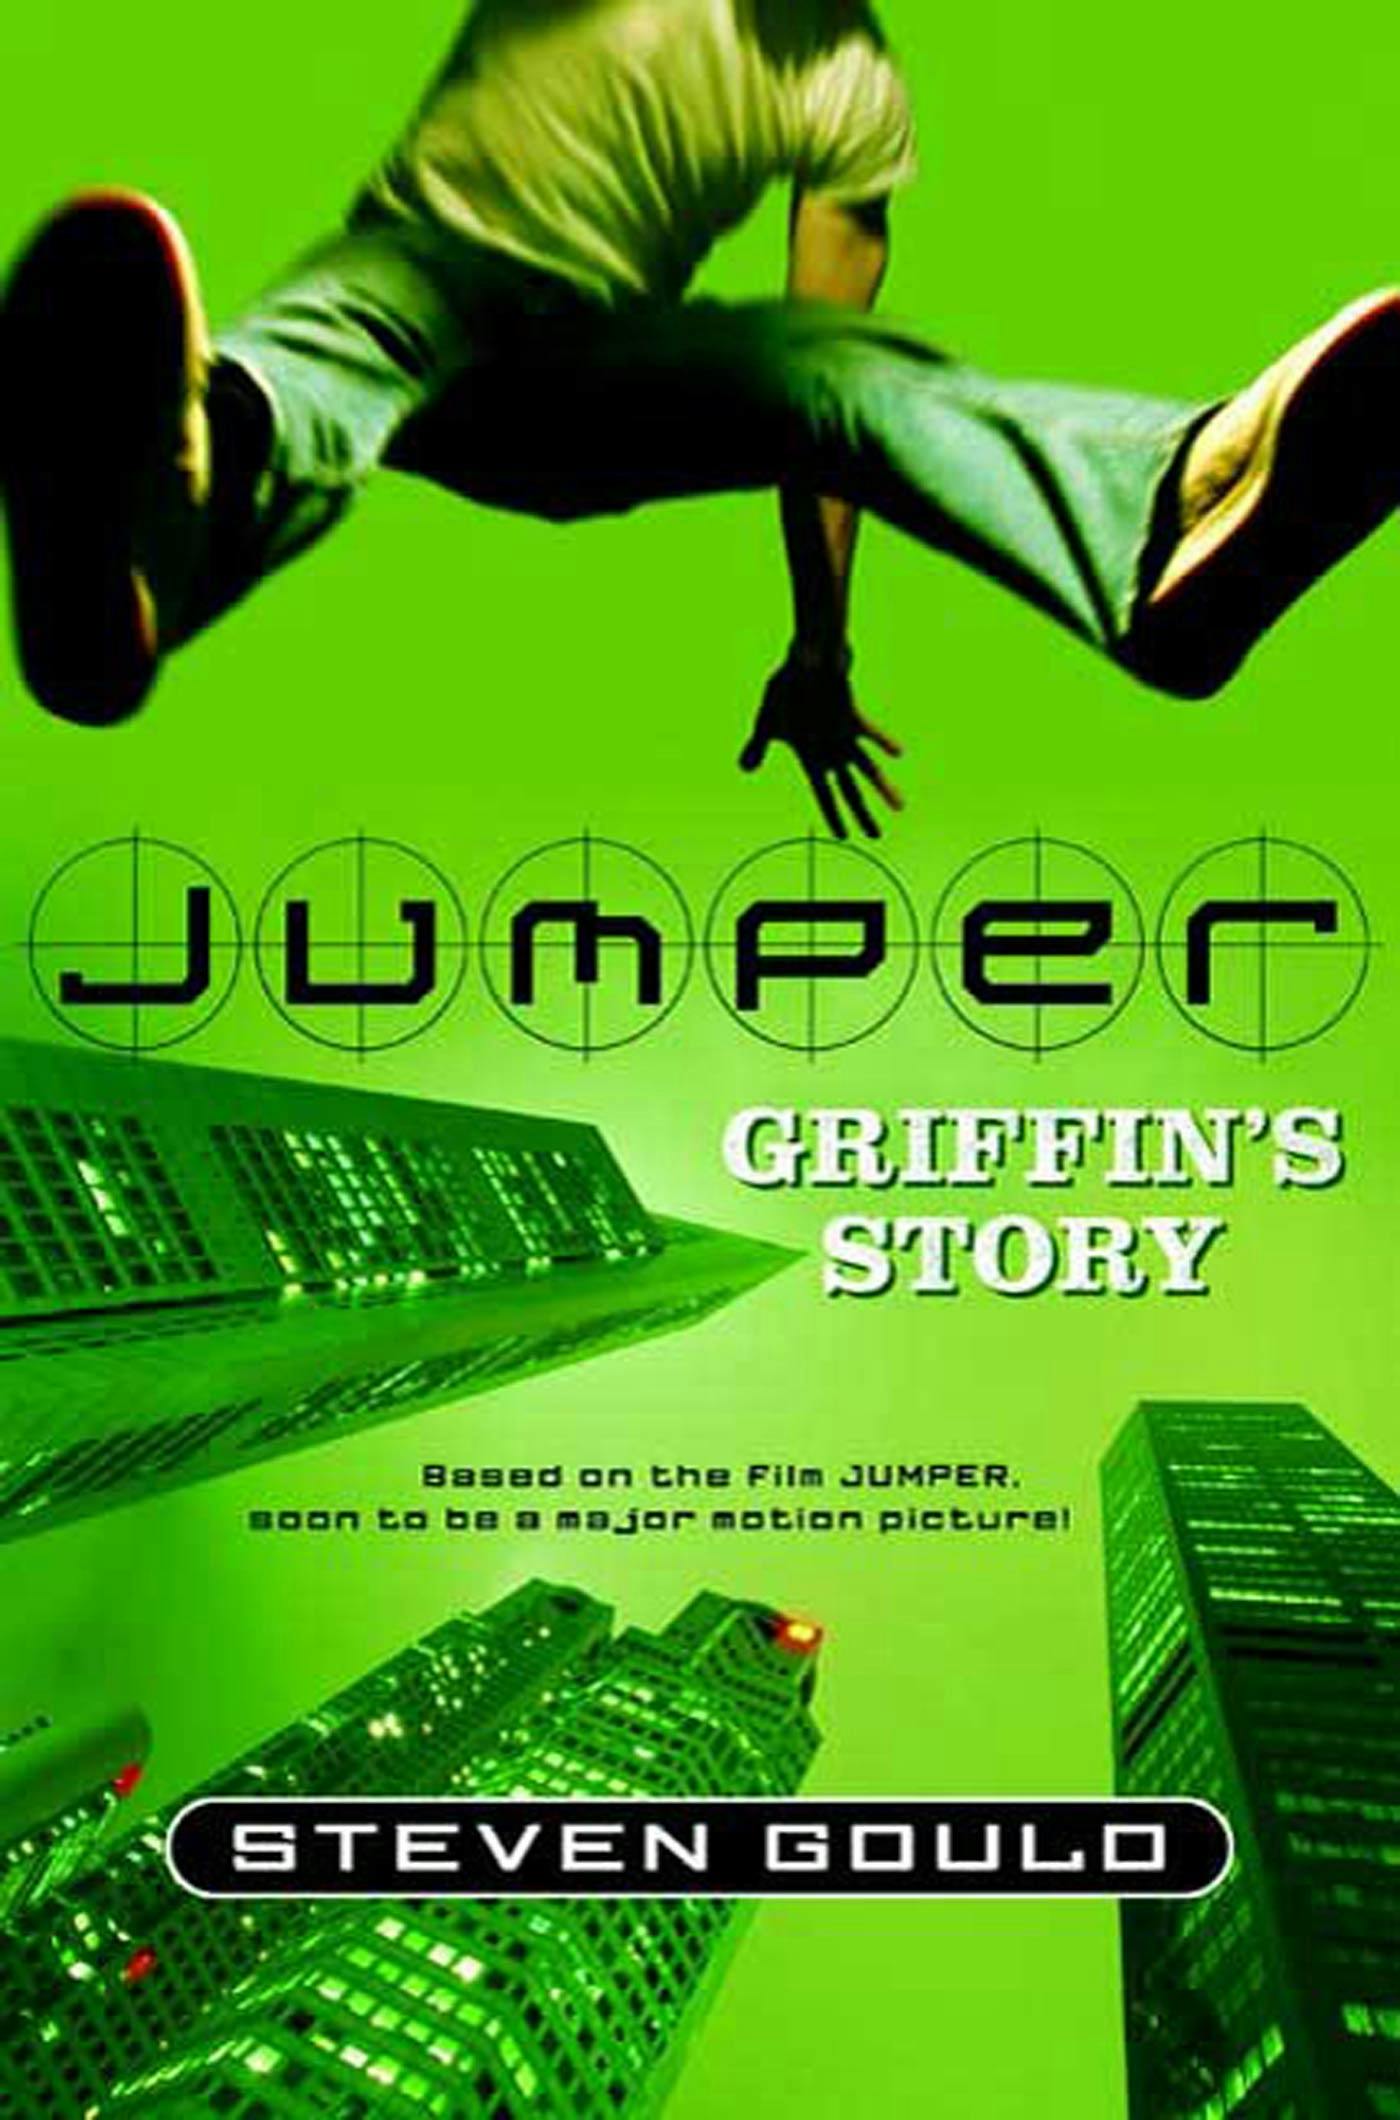 Cover for the book titled as: Jumper: Griffin's Story